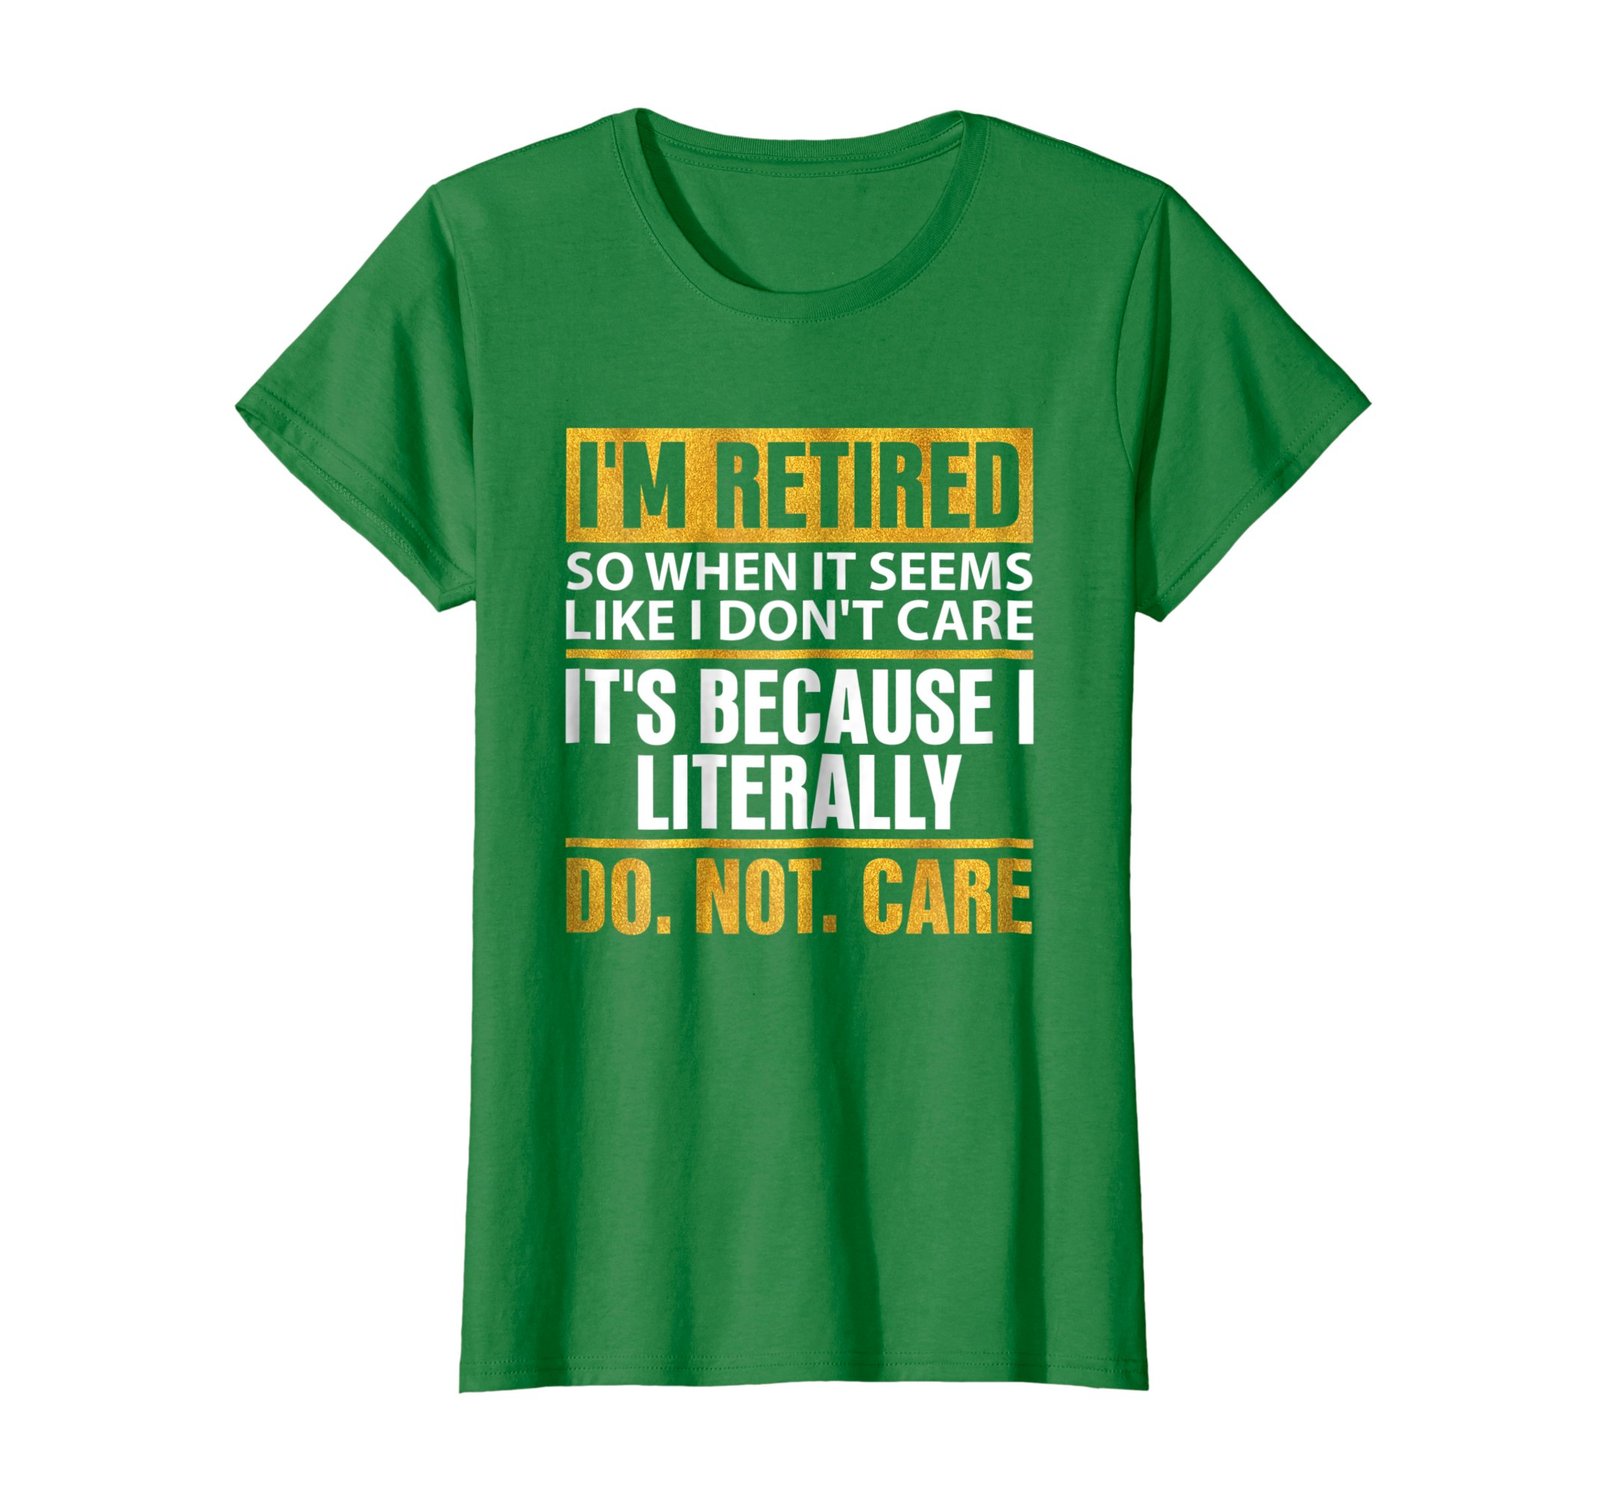 Funny Shirts - I'm Retired I Literally Do Not Care - Retirement T-shirt ...